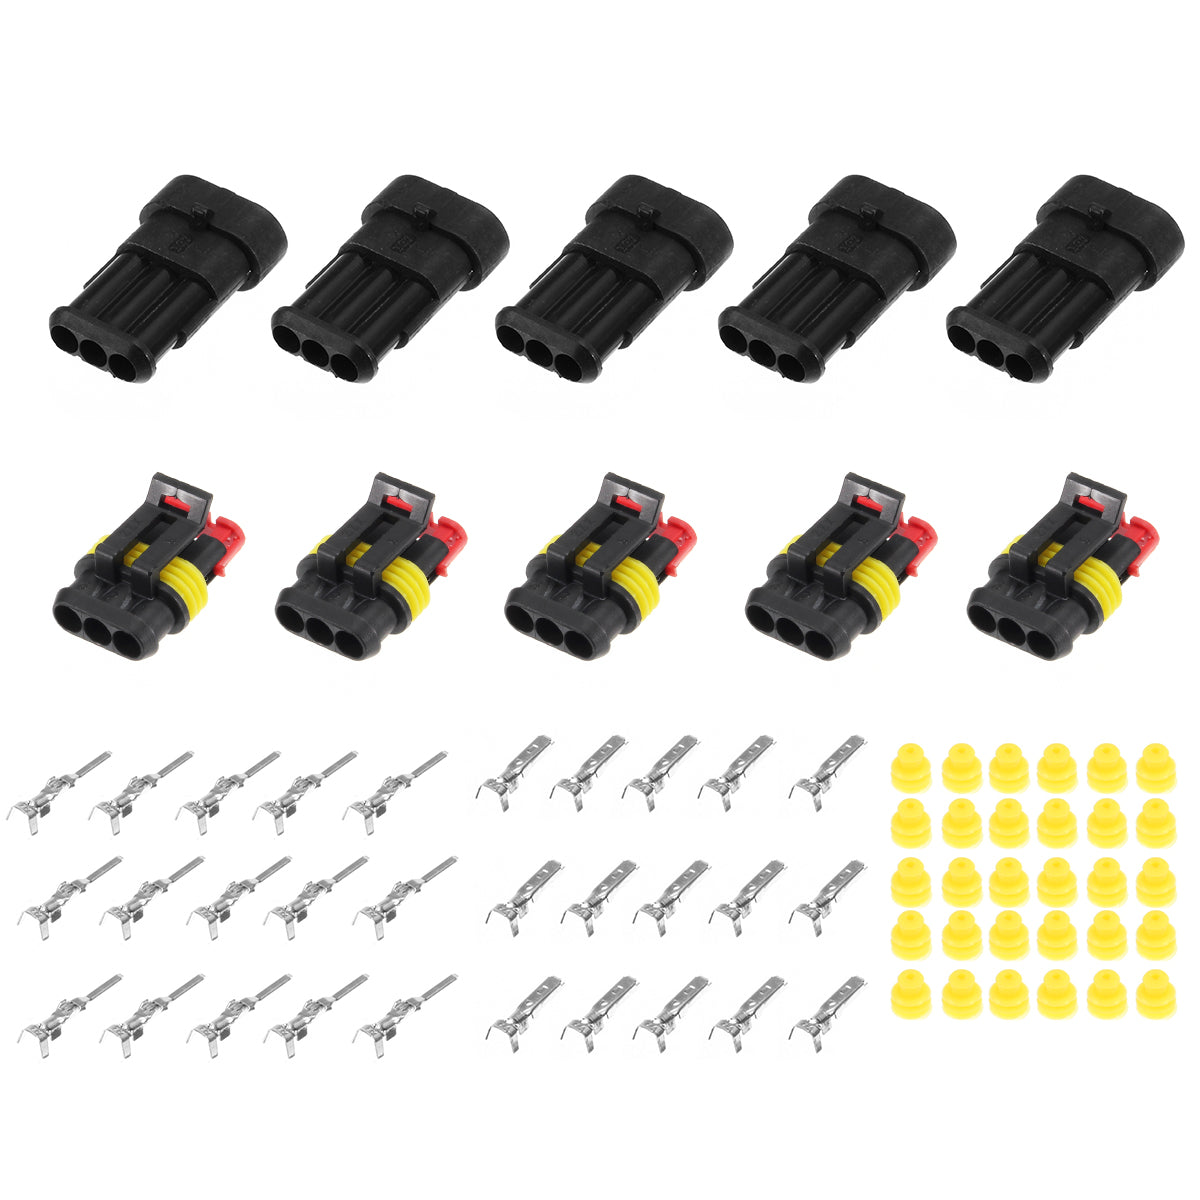 15 Kits 2 3 4 Pins Way Sealed Waterproof Electrical Wire Connector Plug Motorcycle Car Auto